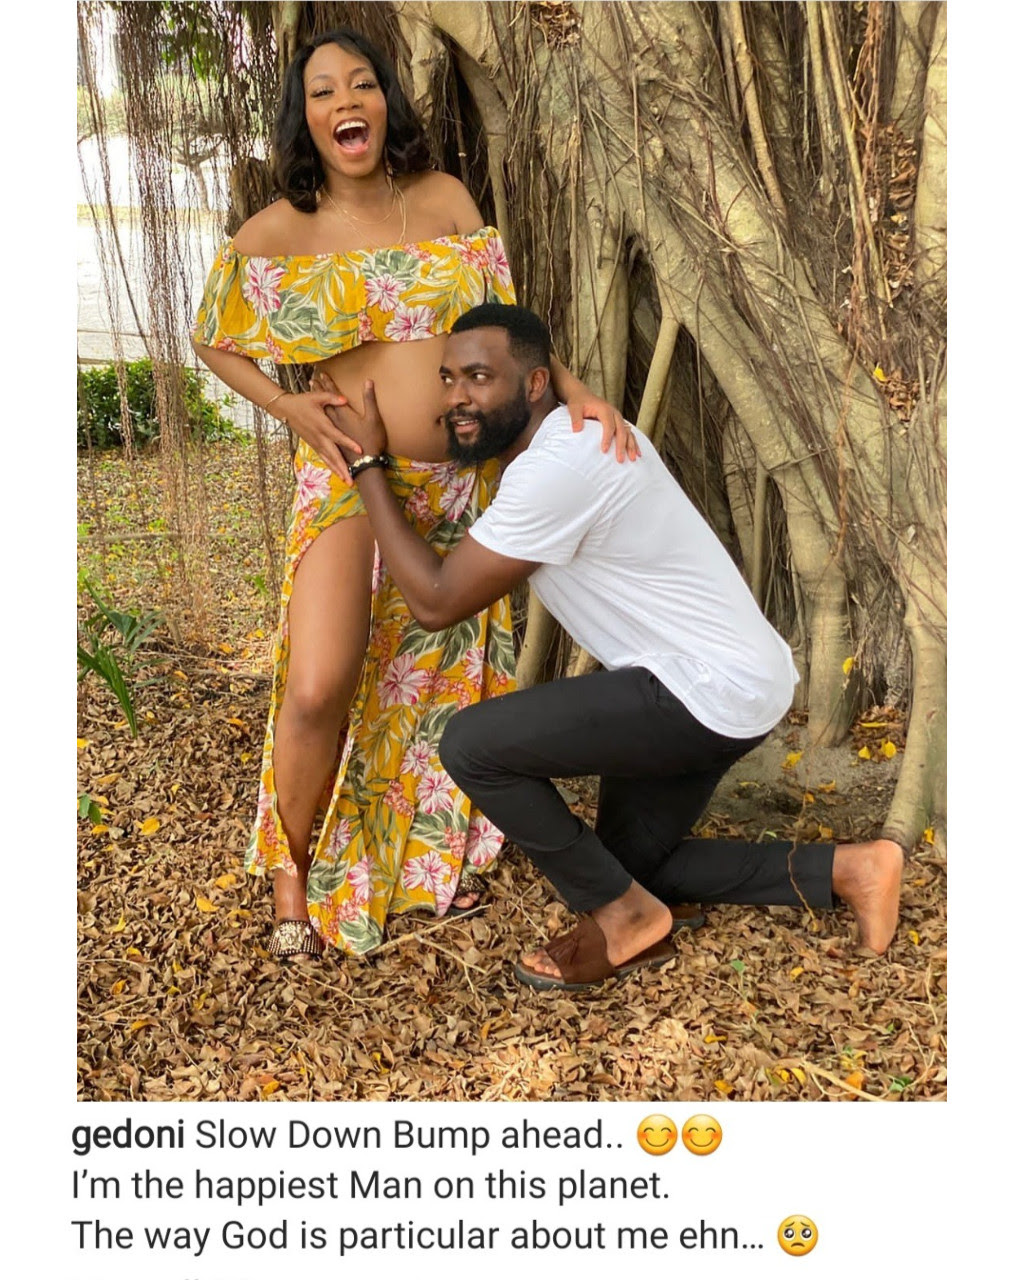 BBNaija 2019 stars, Khafi and Gedoni expecting first child two years after they met during reality show